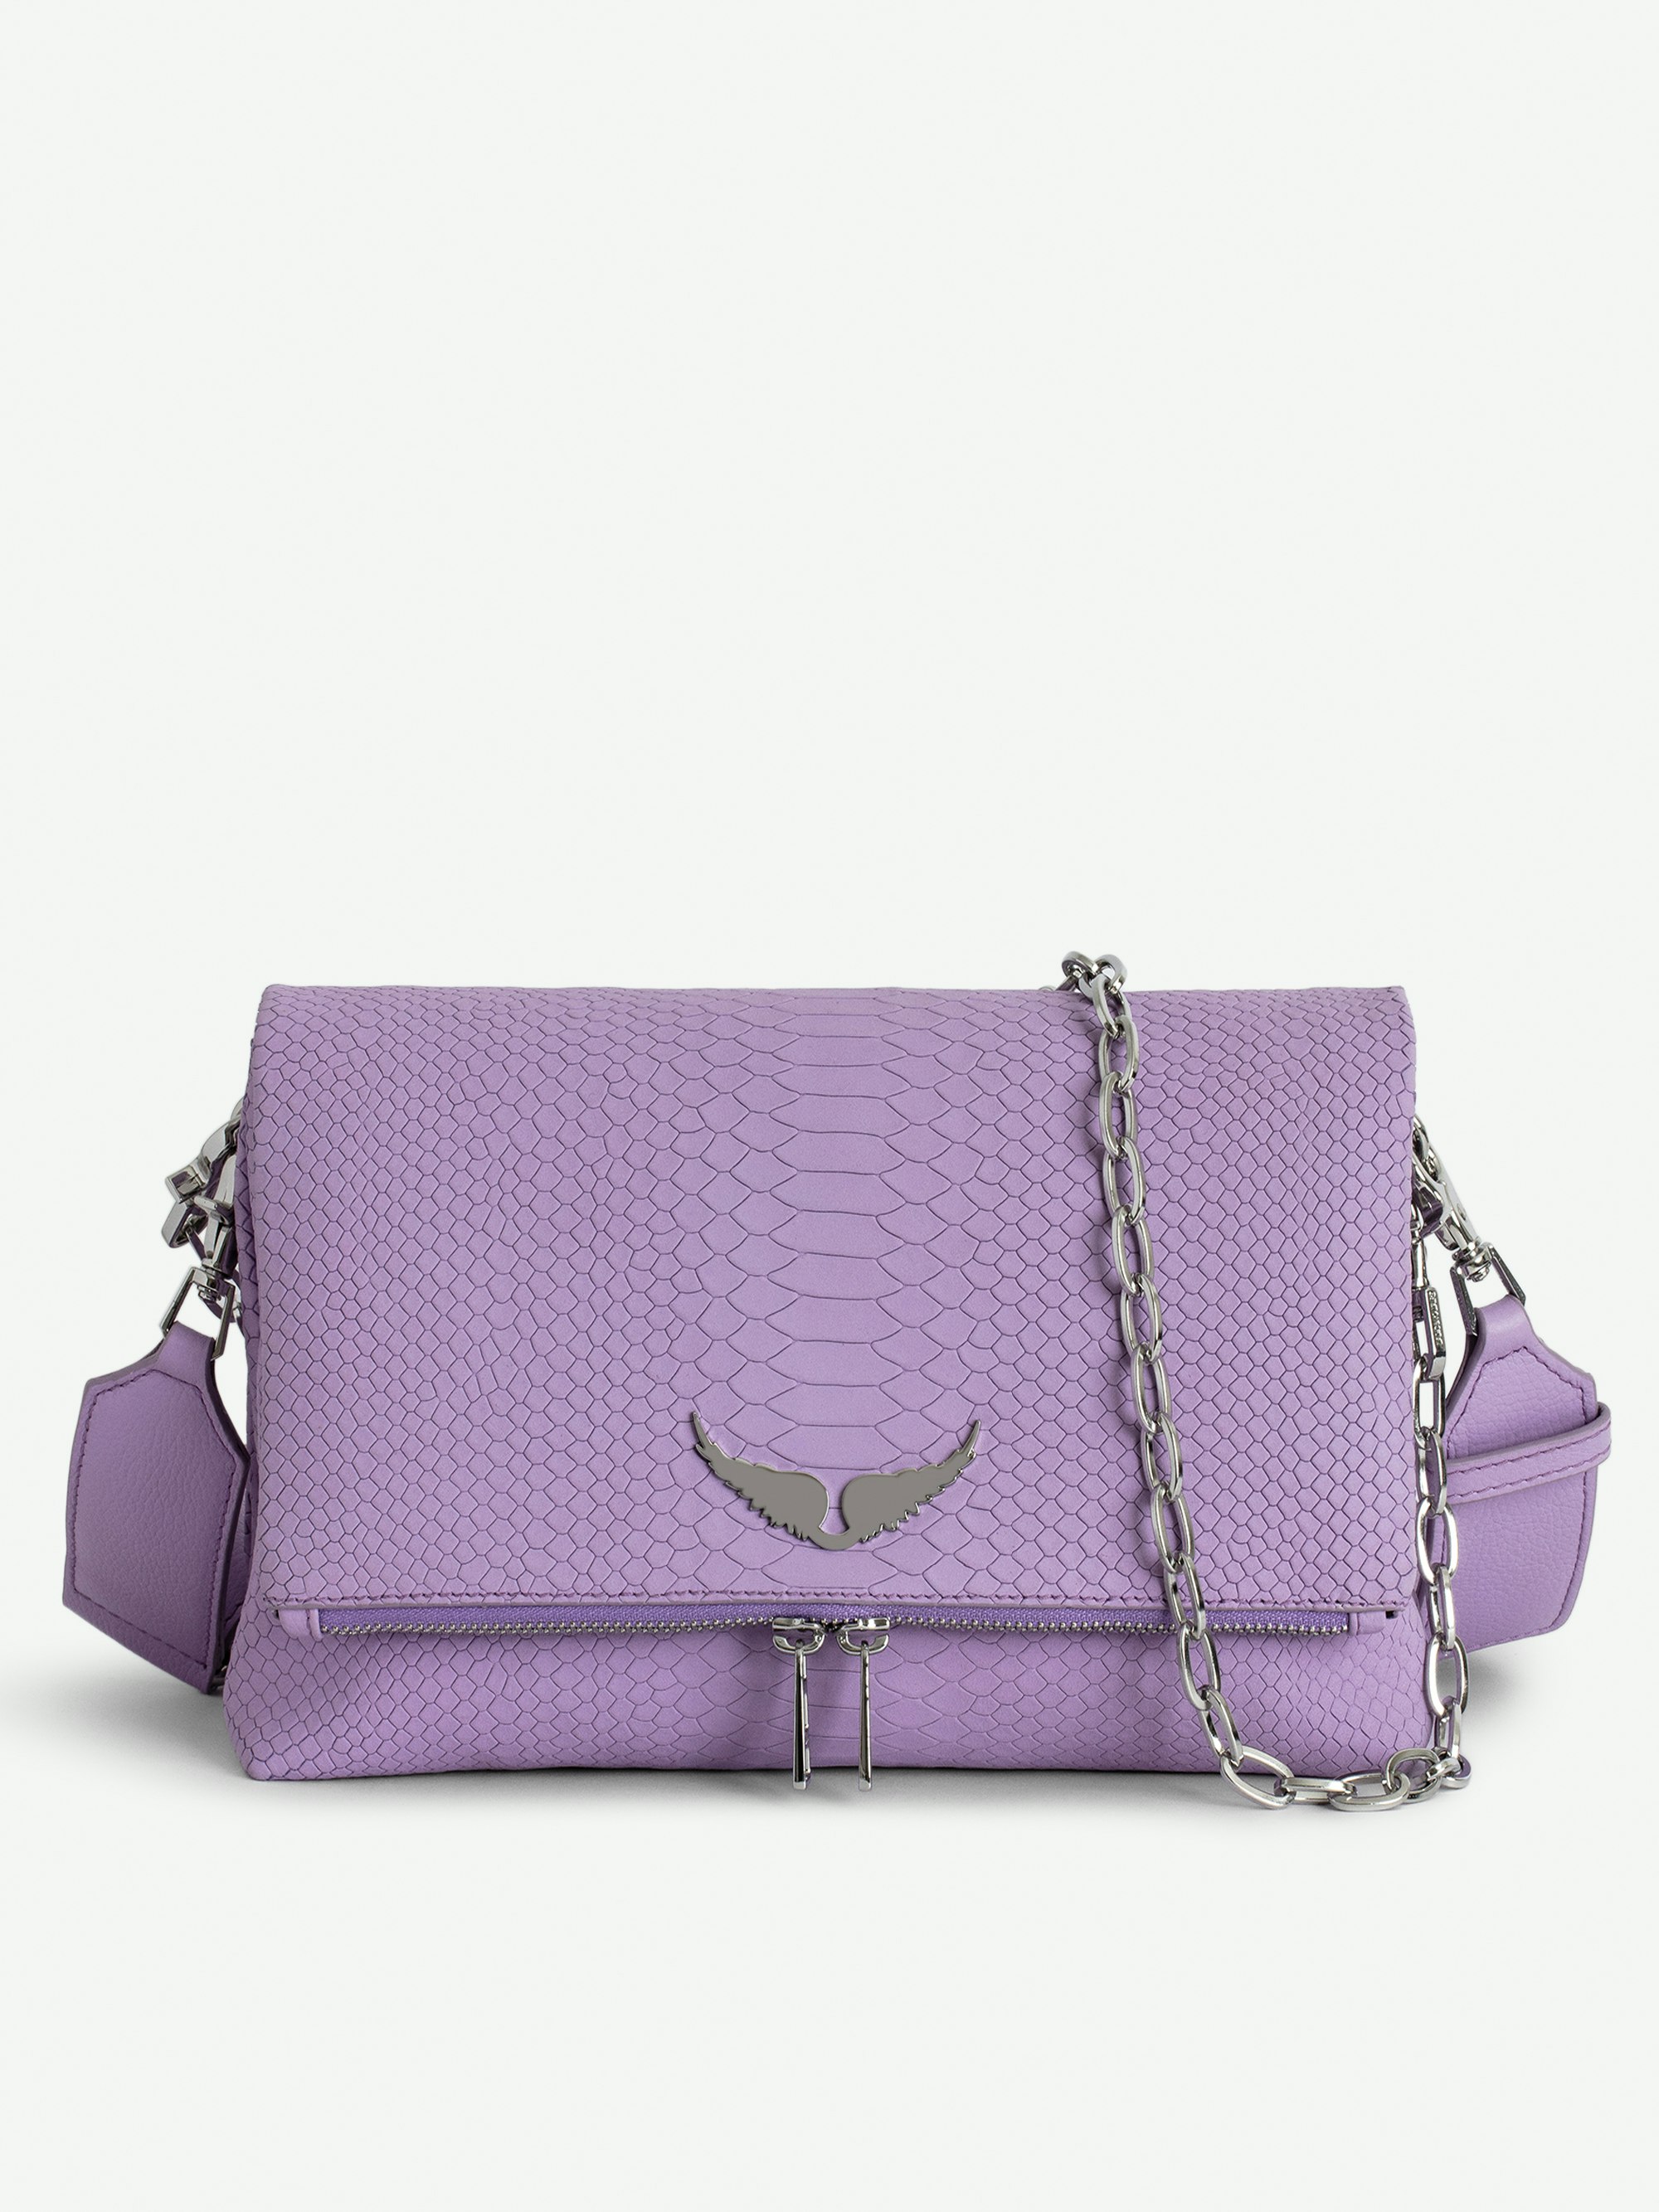 Rocky Soft Savage Bag - Purple python-effect leather bag with shoulder strap, chain and wings charm.